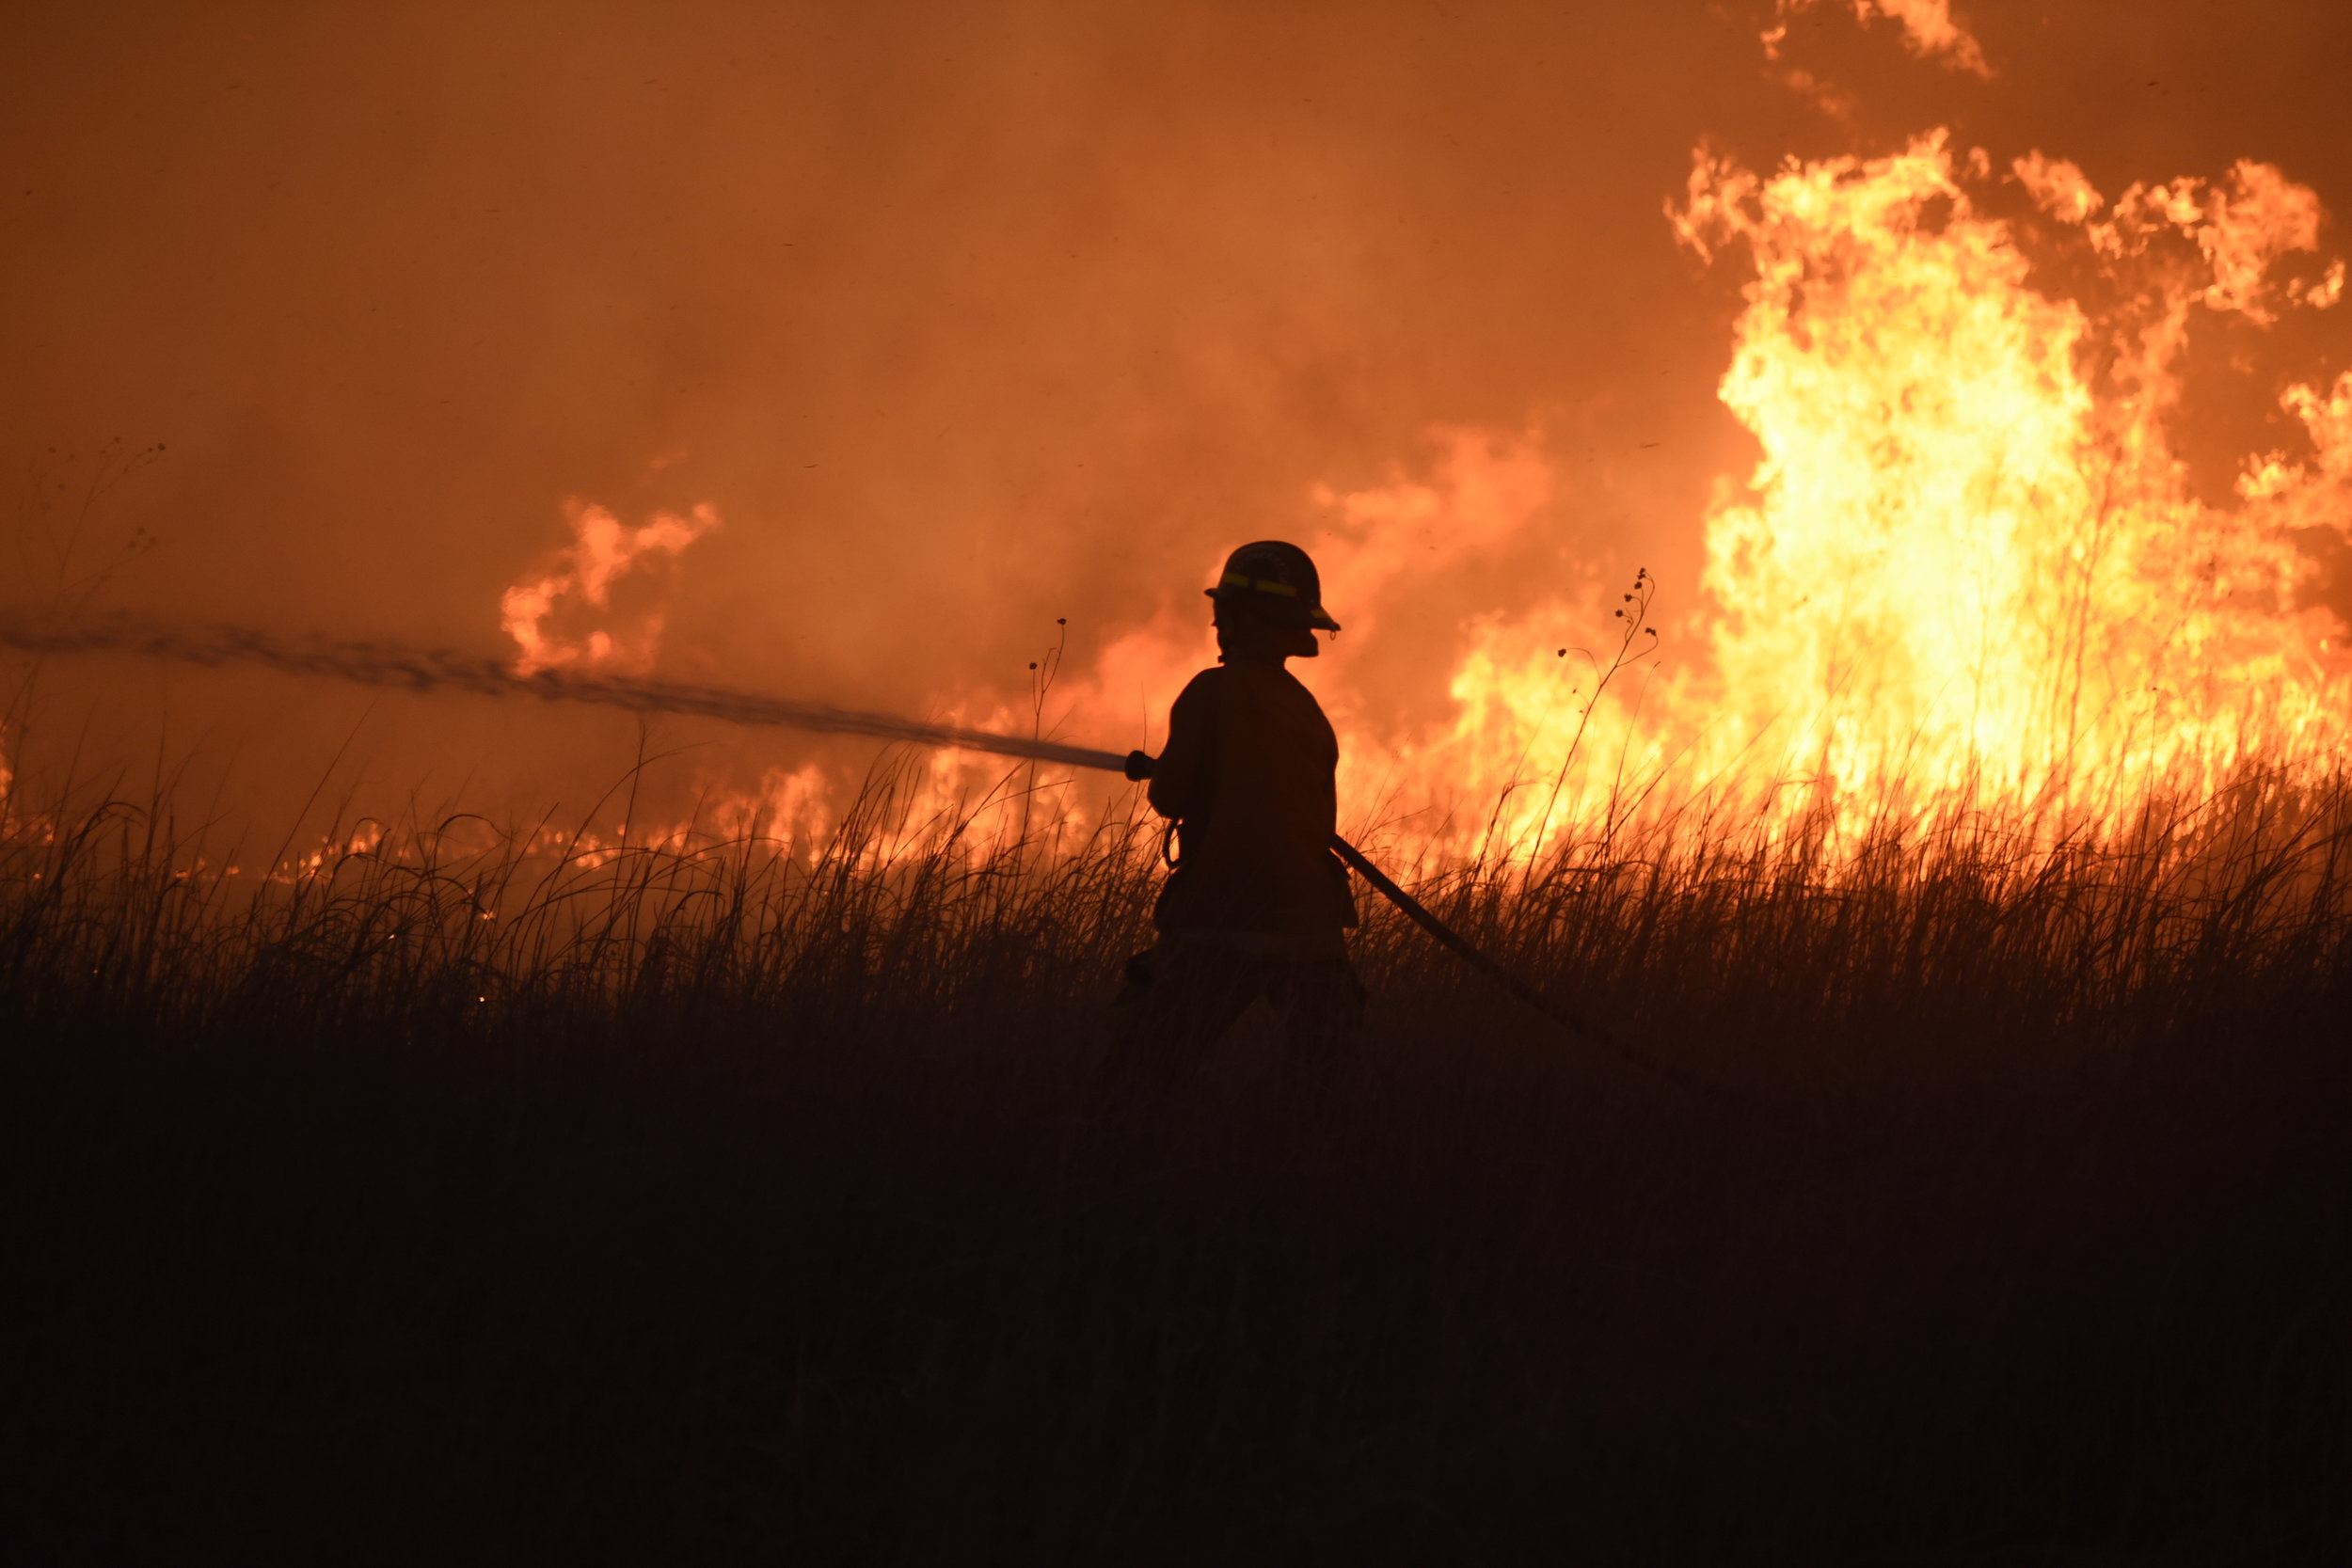  A firefighter works to control the Rhea fire near Seiling, Oklahoma, U.S. April 17, 2018. REUTERS/Nick Oxford 